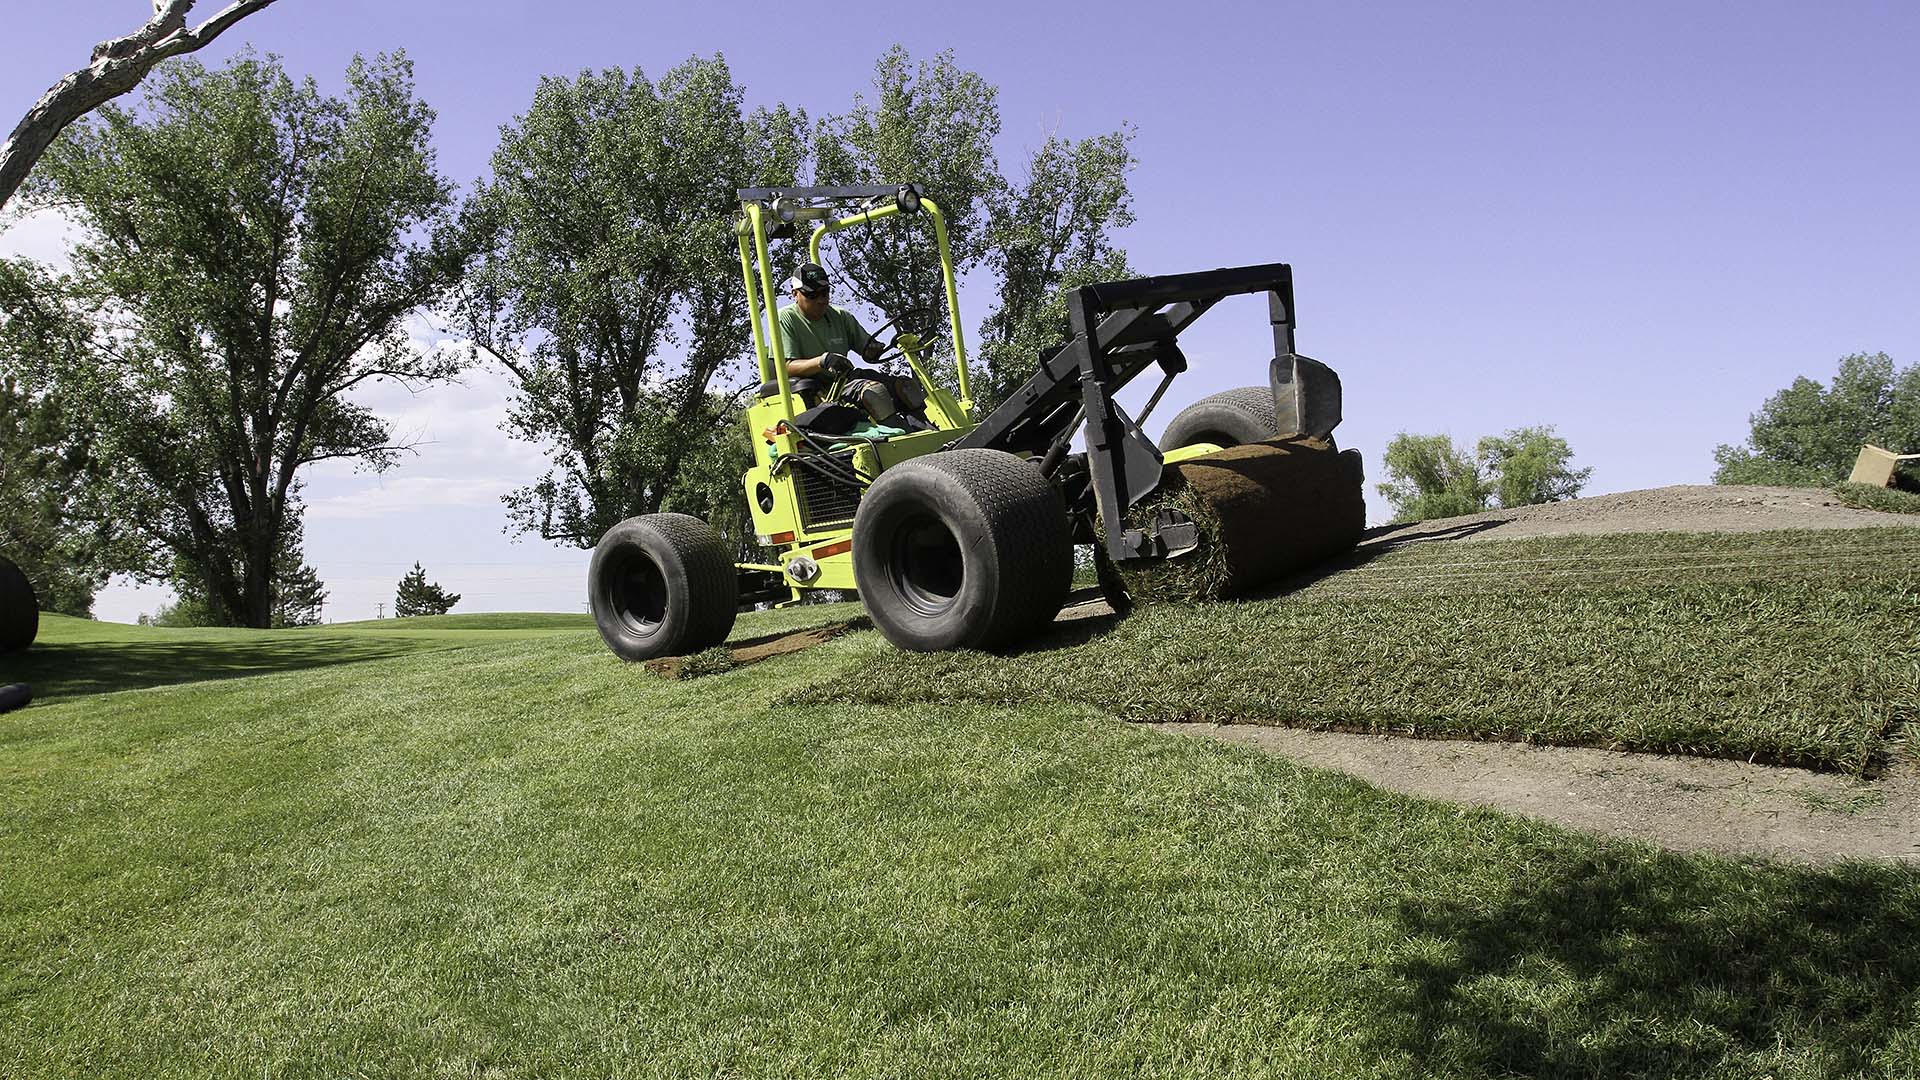 RTF® Water Saver tall fescue sod was selected for all bunker faces and would transition to bluegrass outside the bunker.